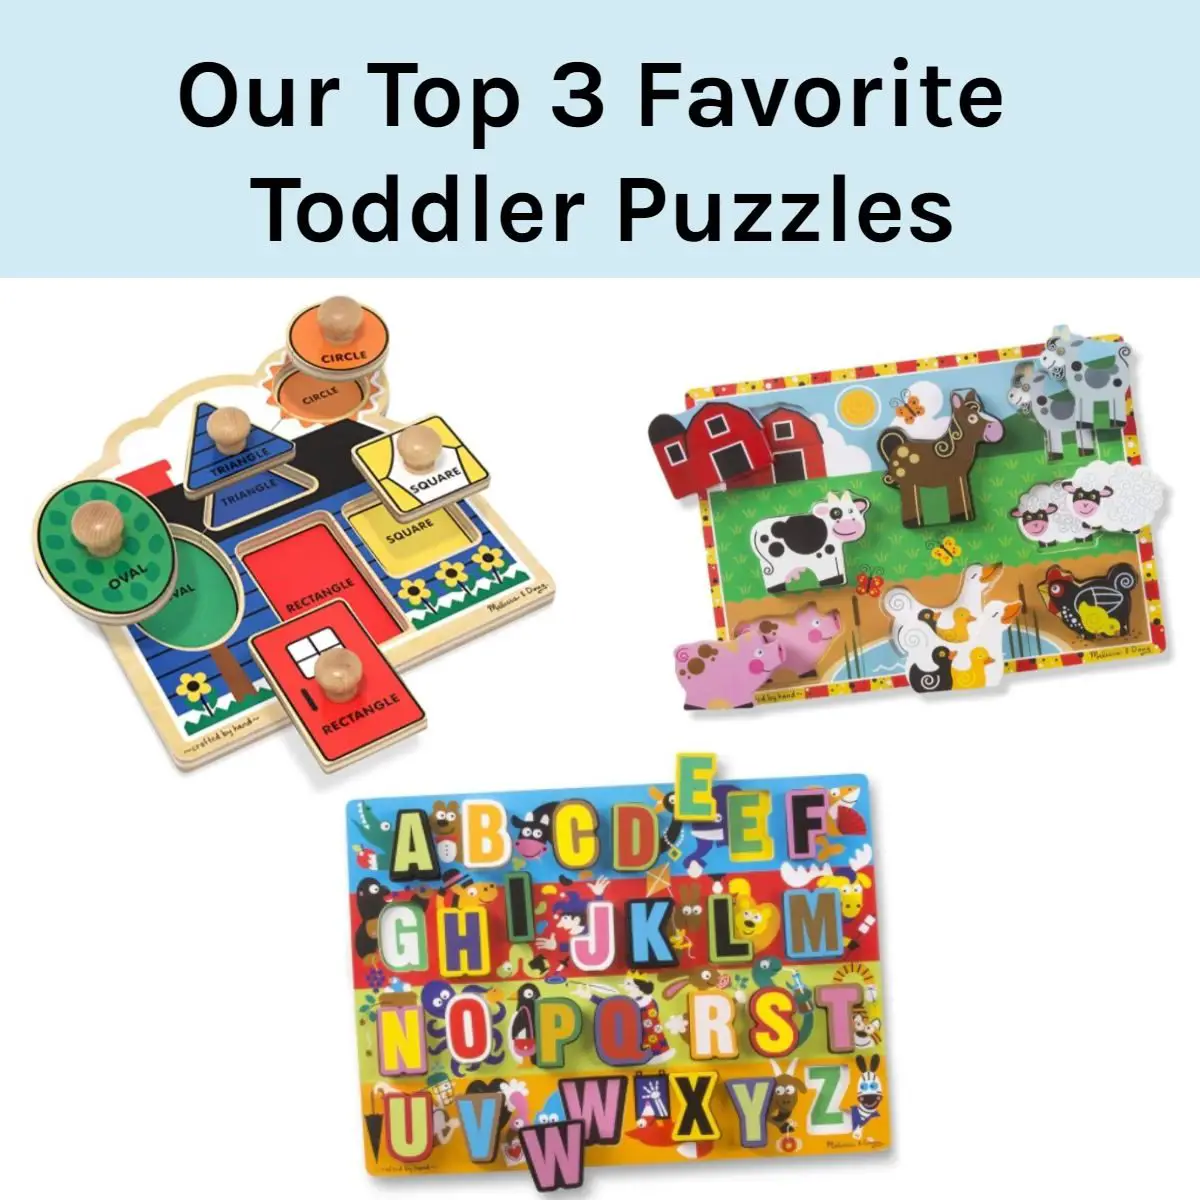 BEST TODDLER PUZZLES